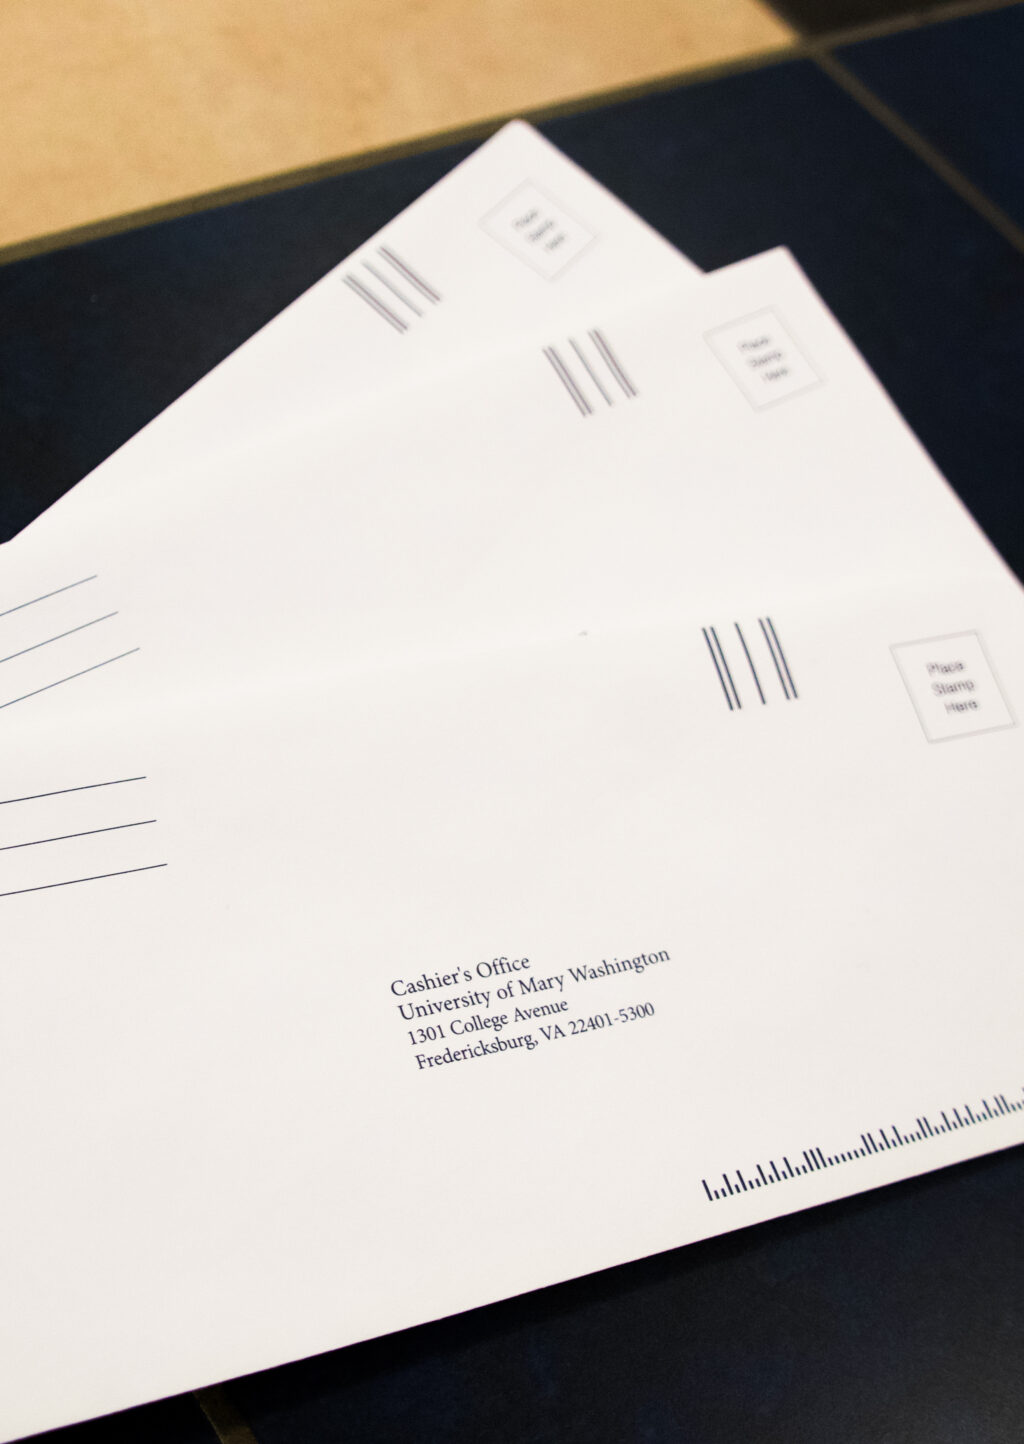 Three envelopes that have the Cashier Office location